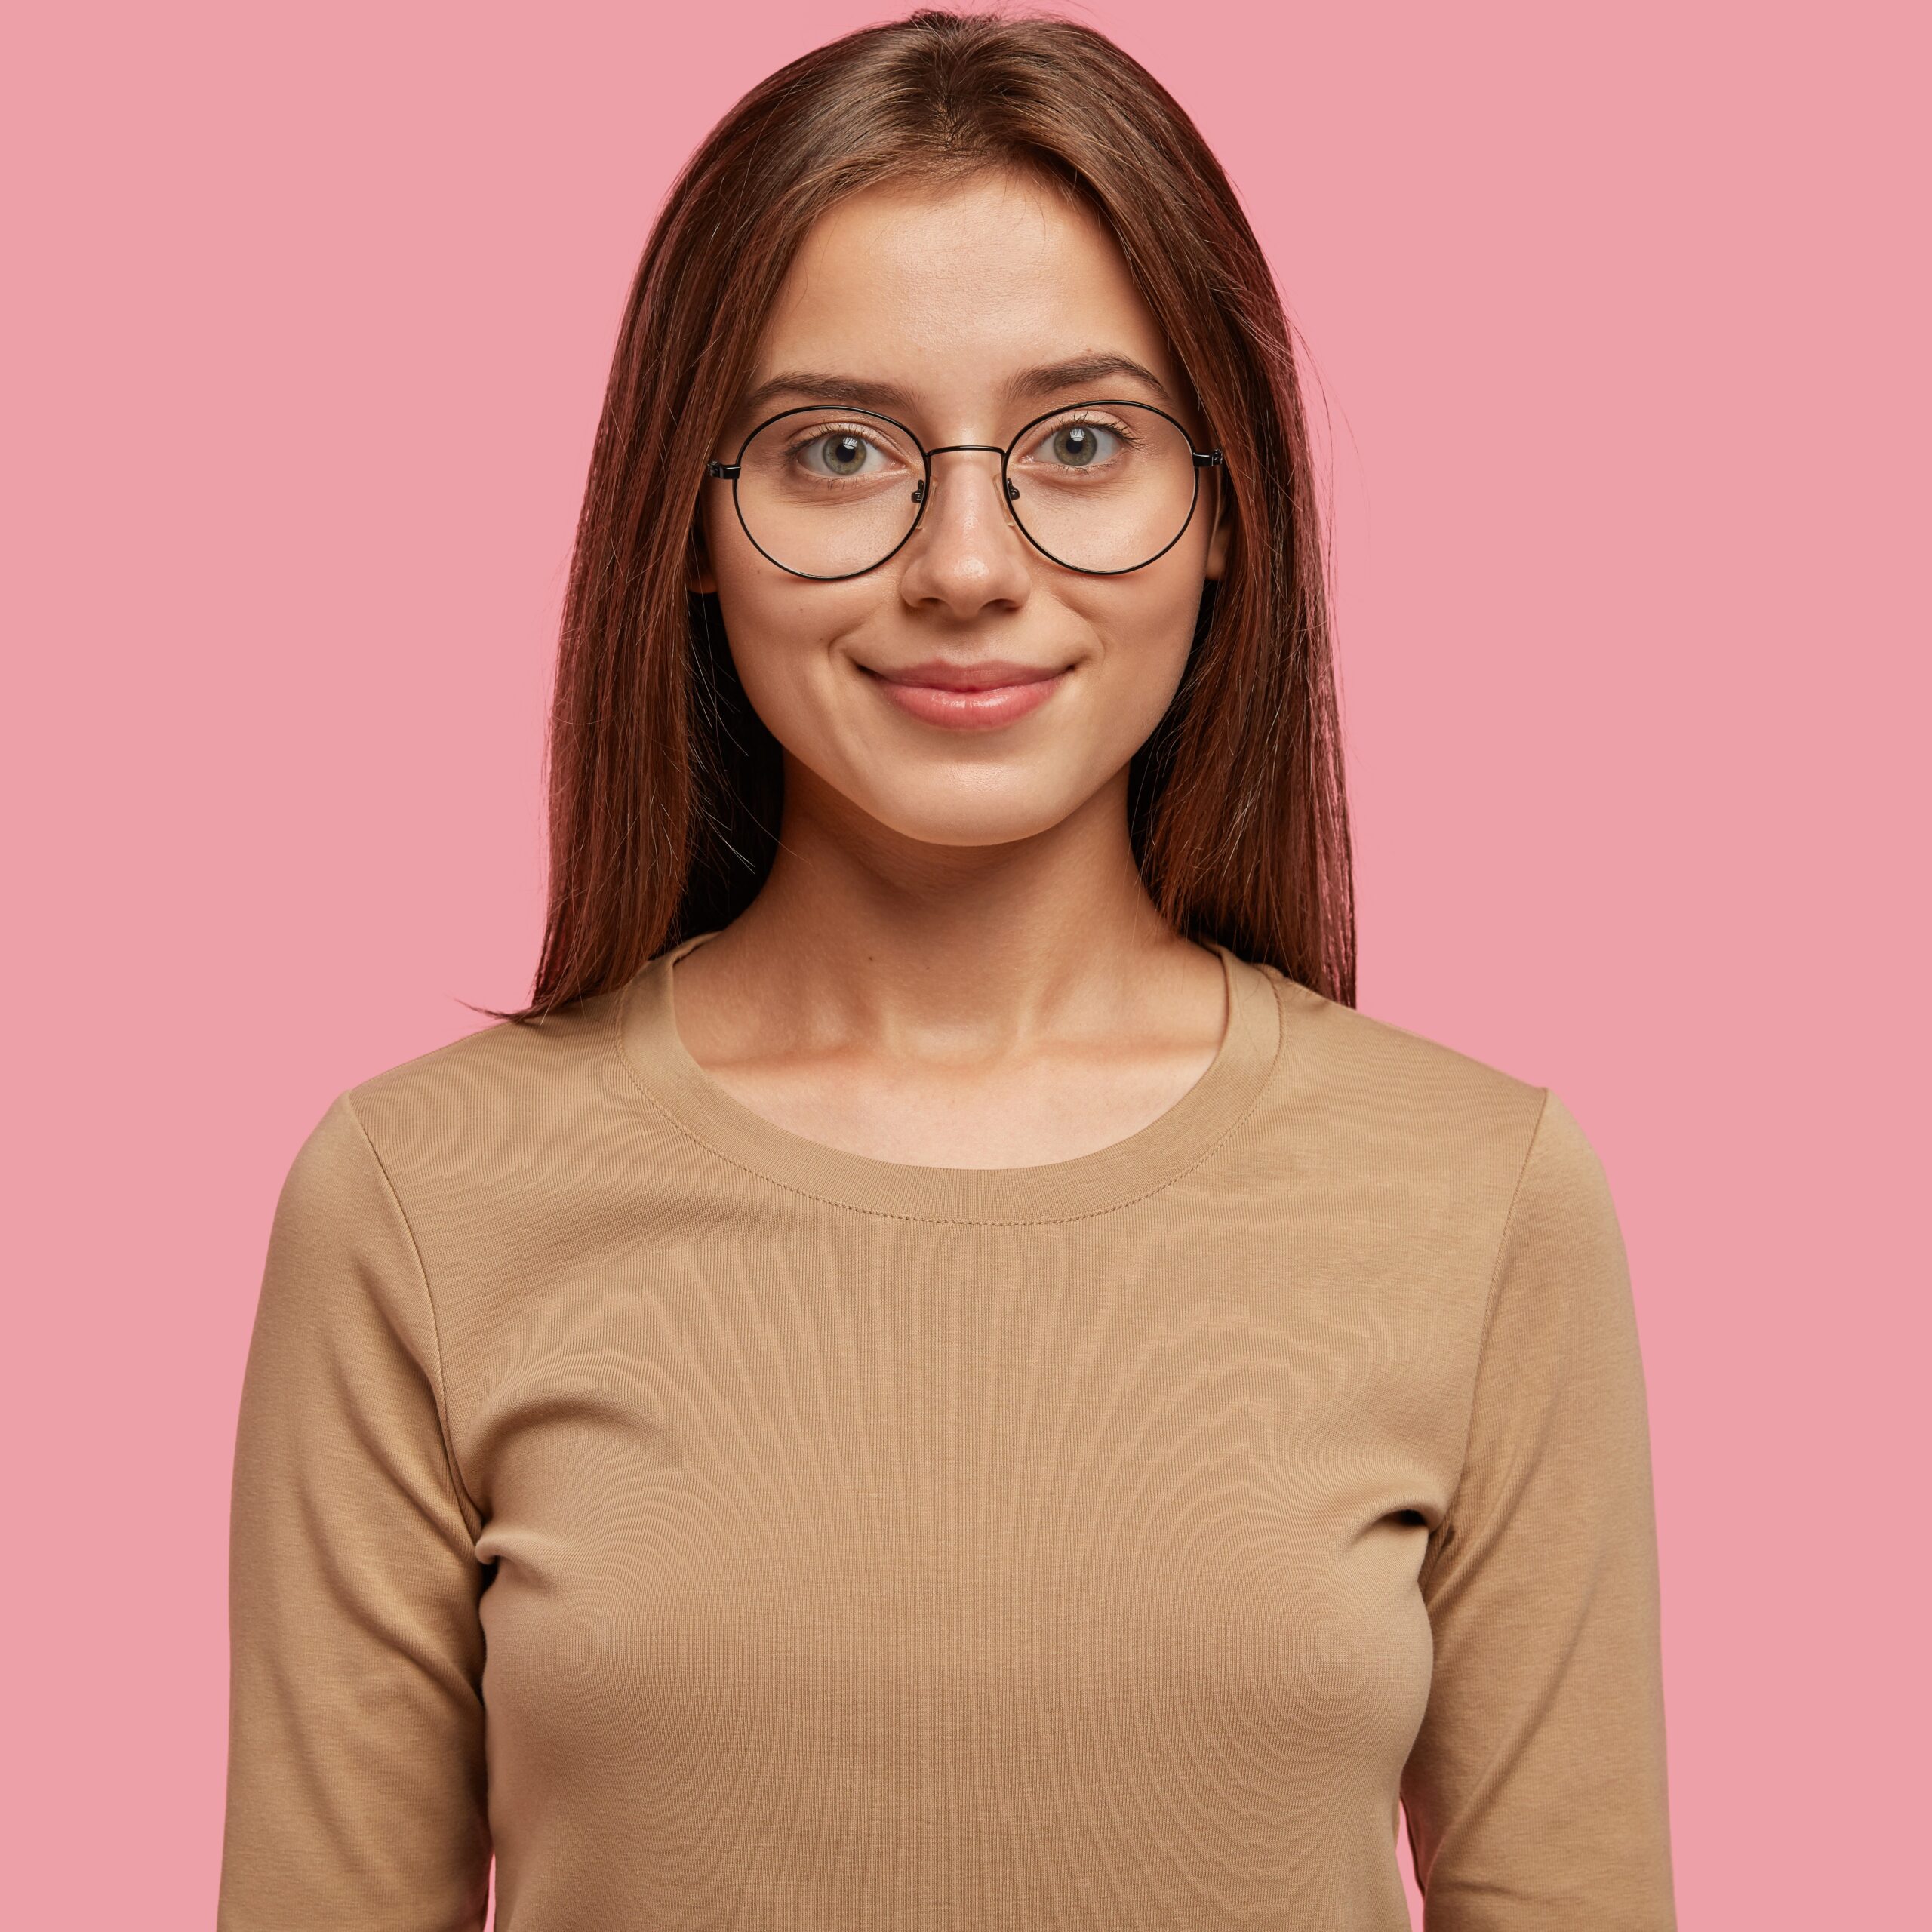 Photo of pleasant looking girl has healthy soft skin, dark staright hair, dressed in casual sweater, looks directly at camera, models against pink background. People, beauty and facial expressions